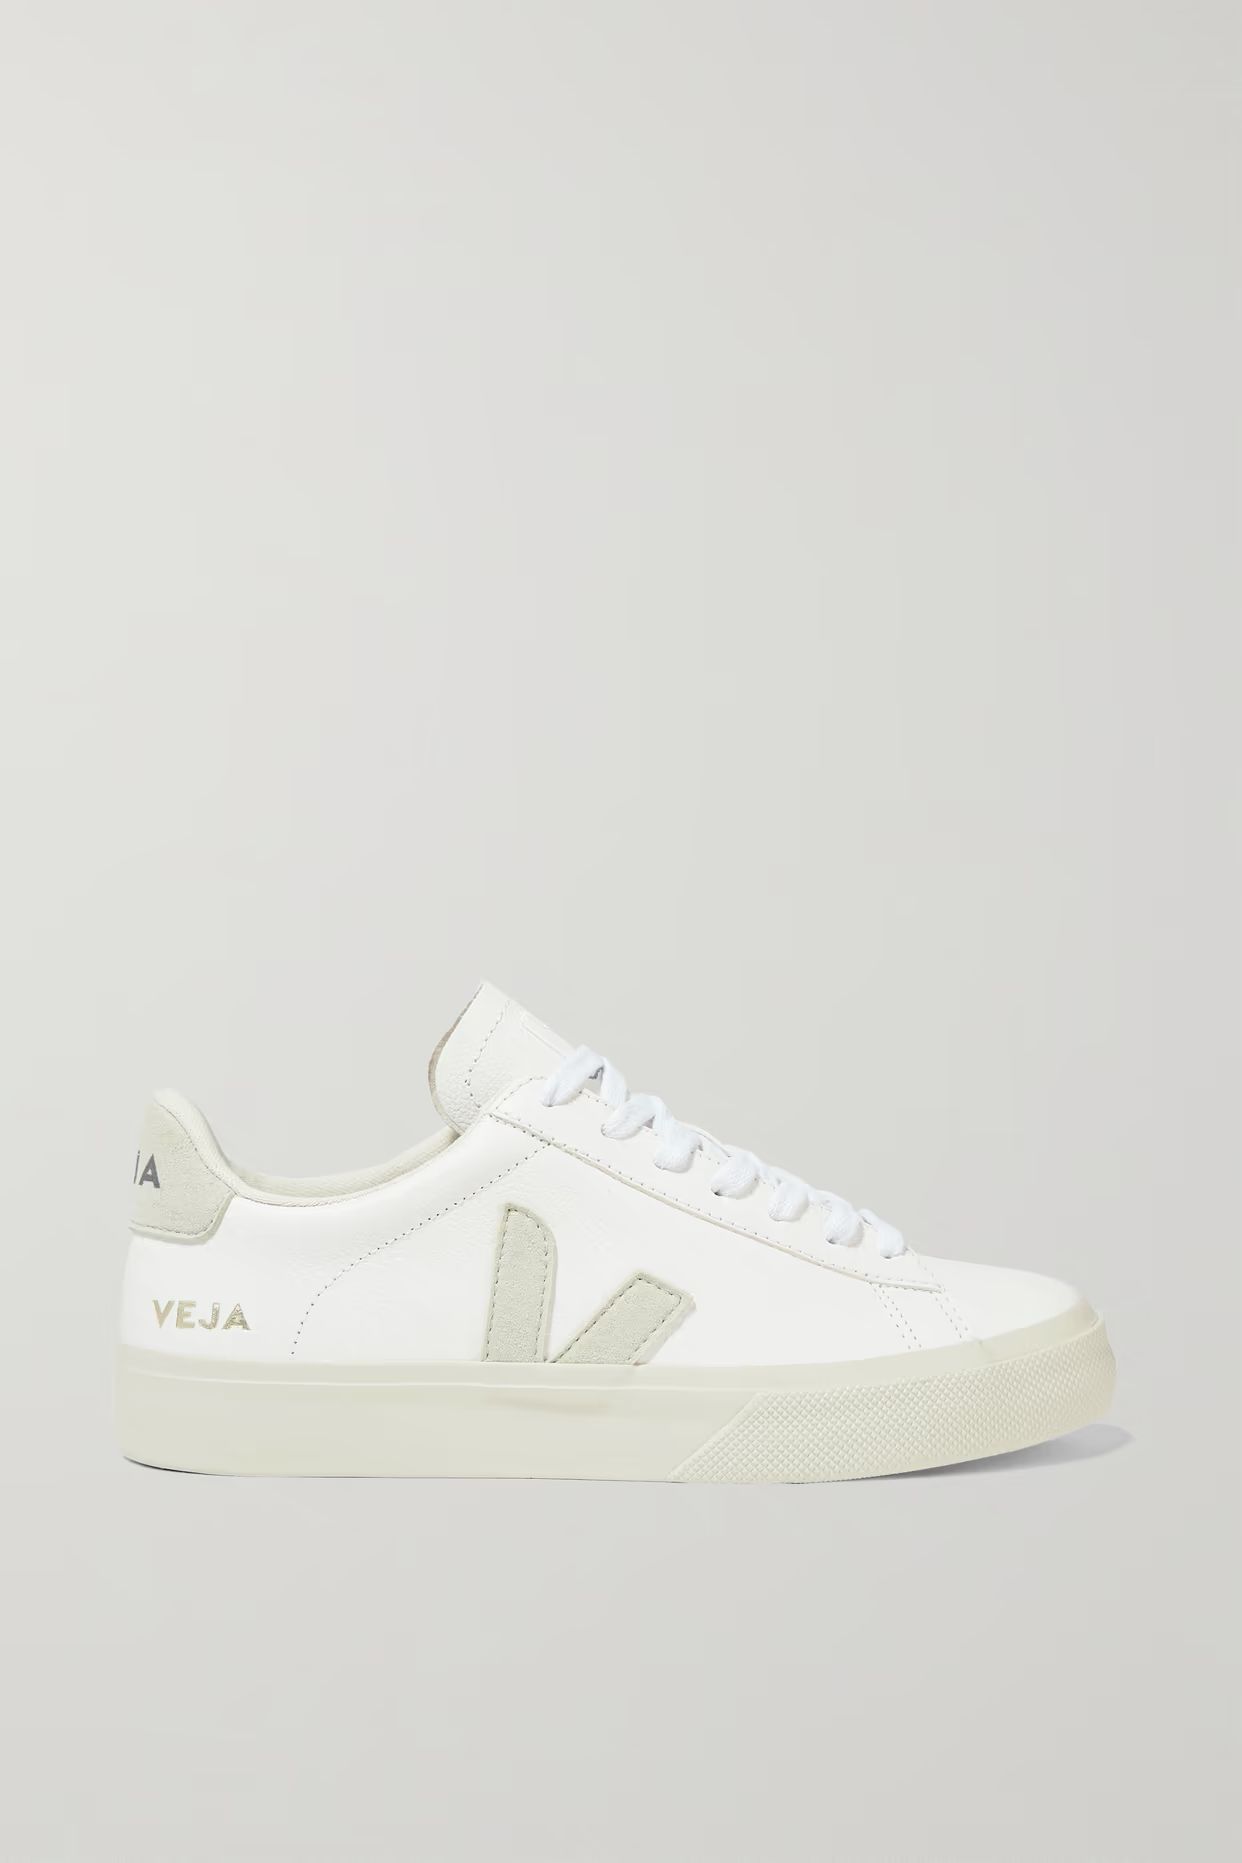 Veja - Campo Textured-leather Sneakers - White | NET-A-PORTER (US)